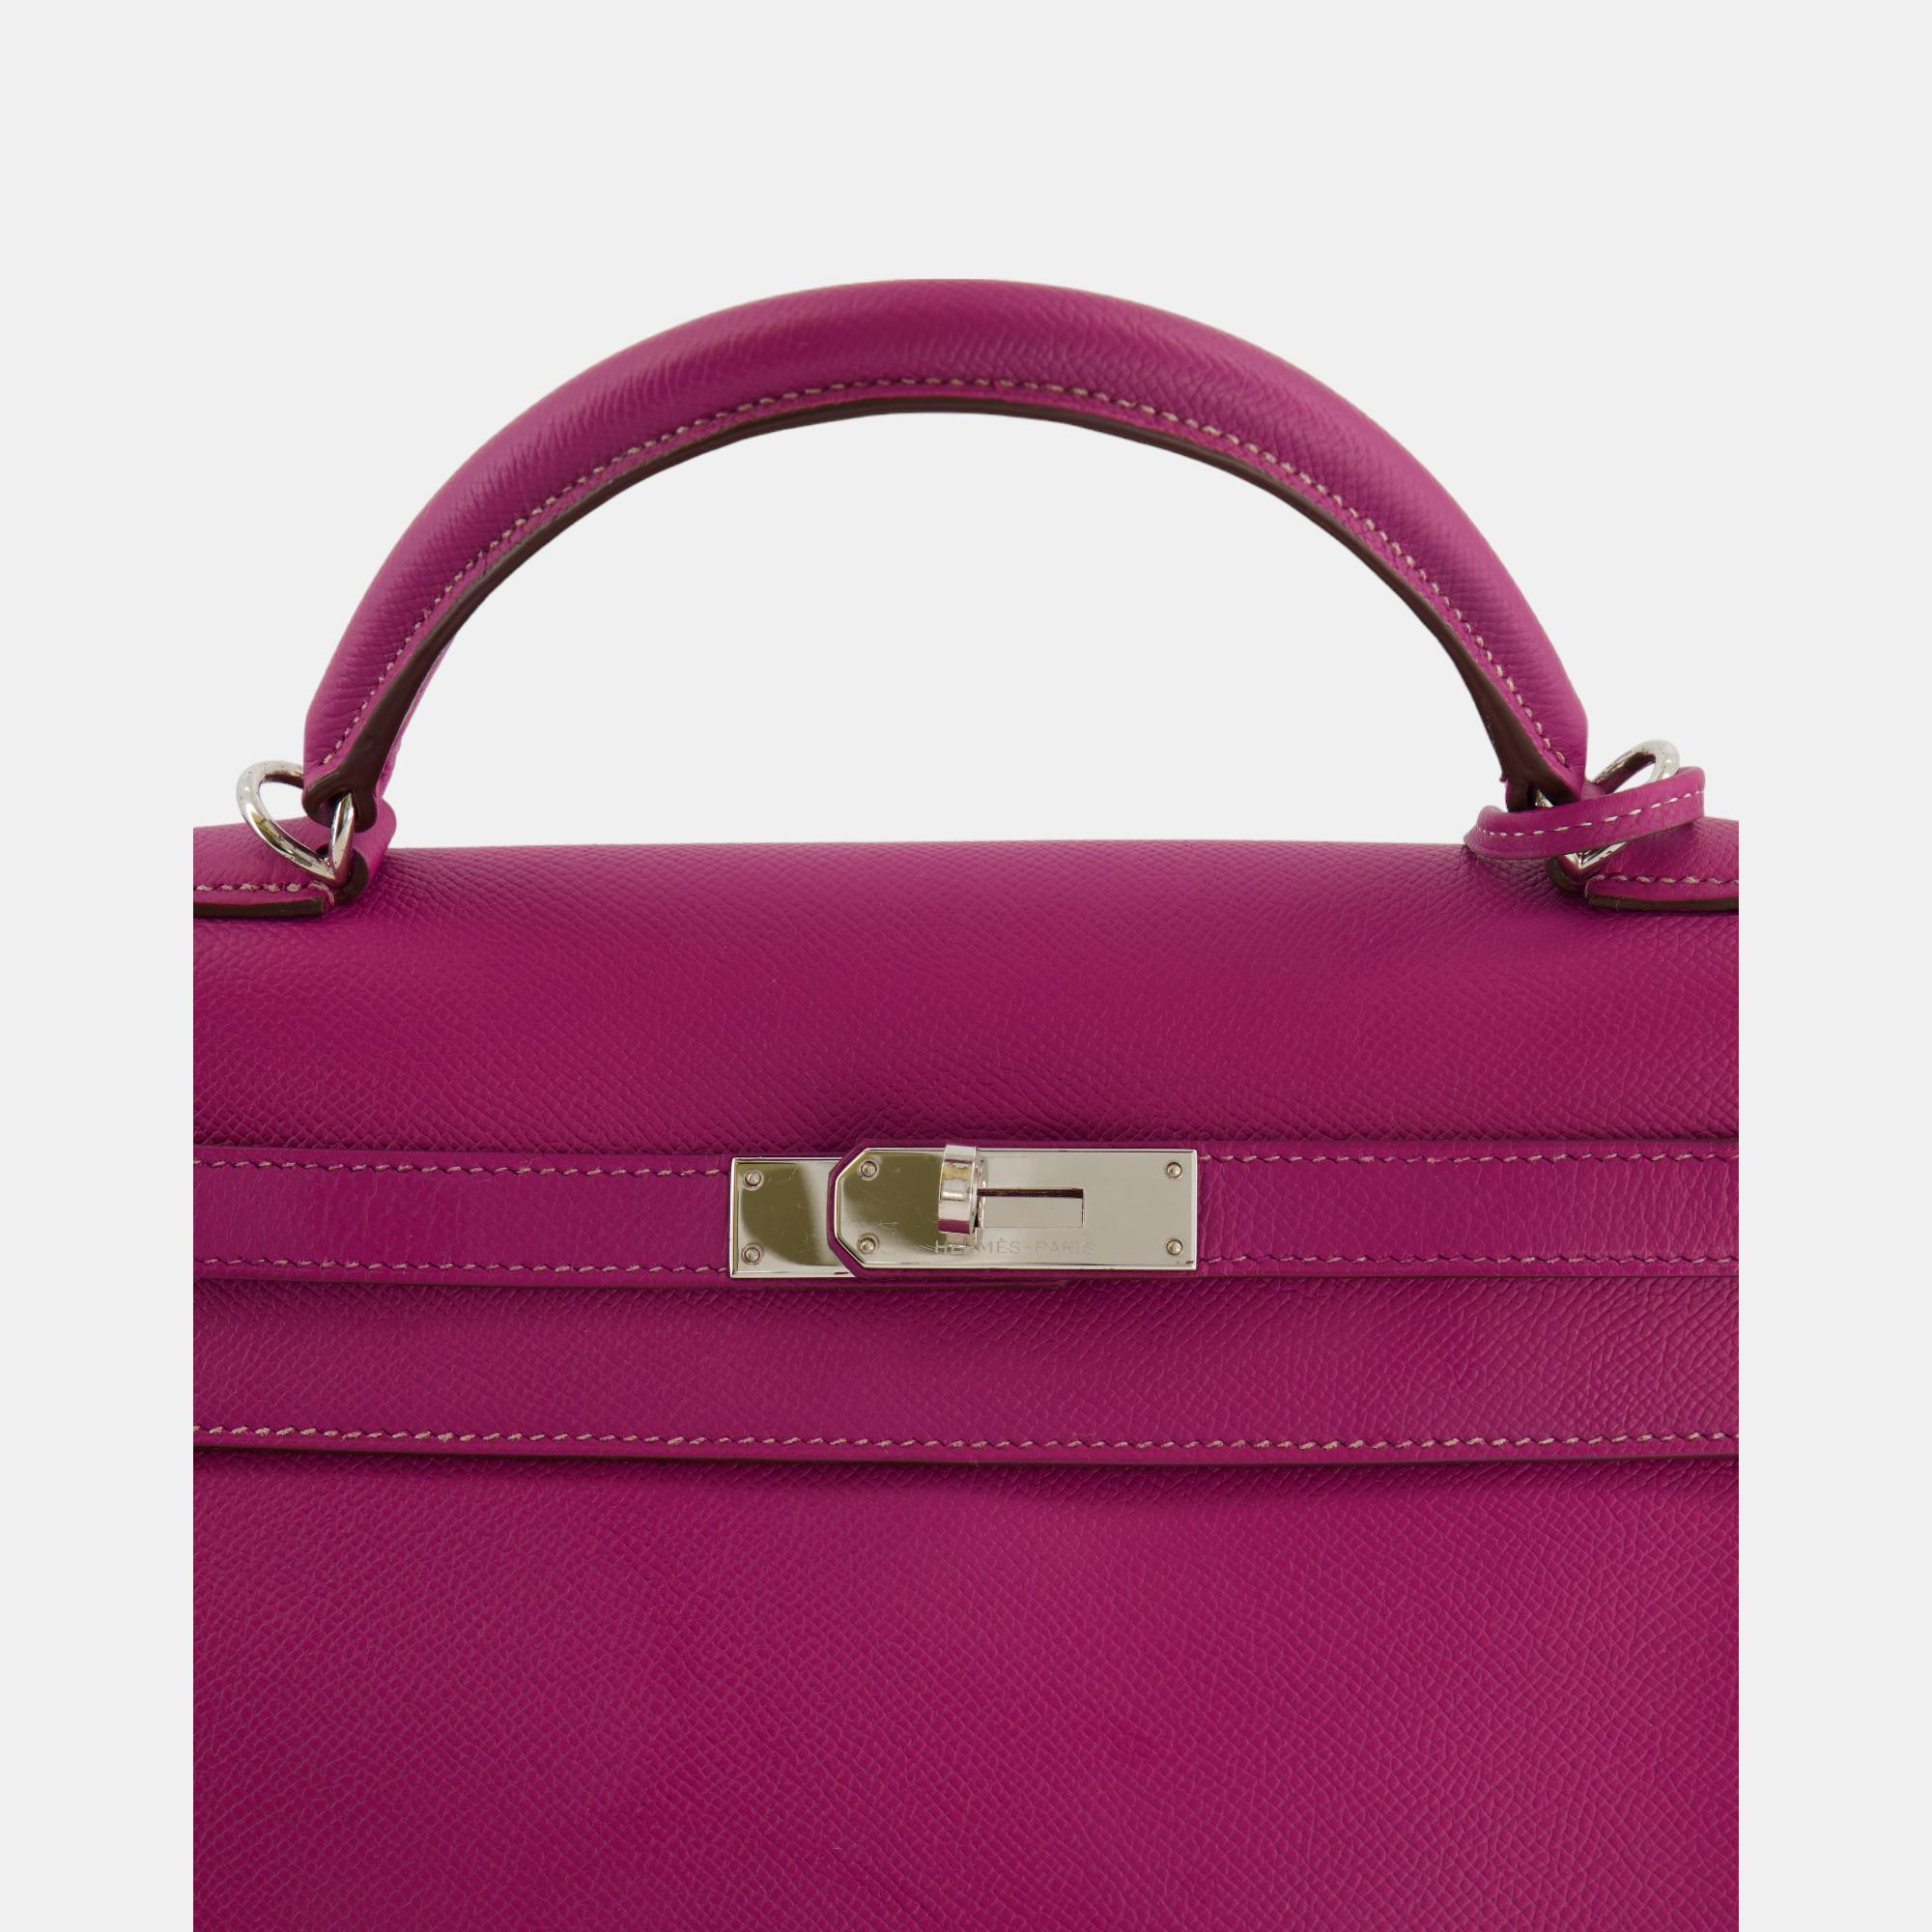 Hermes Candy Kelly Bag 32cm Retourne In Tosca Epsom Leather And Rose Tyrien Interior With Palladium Hardware